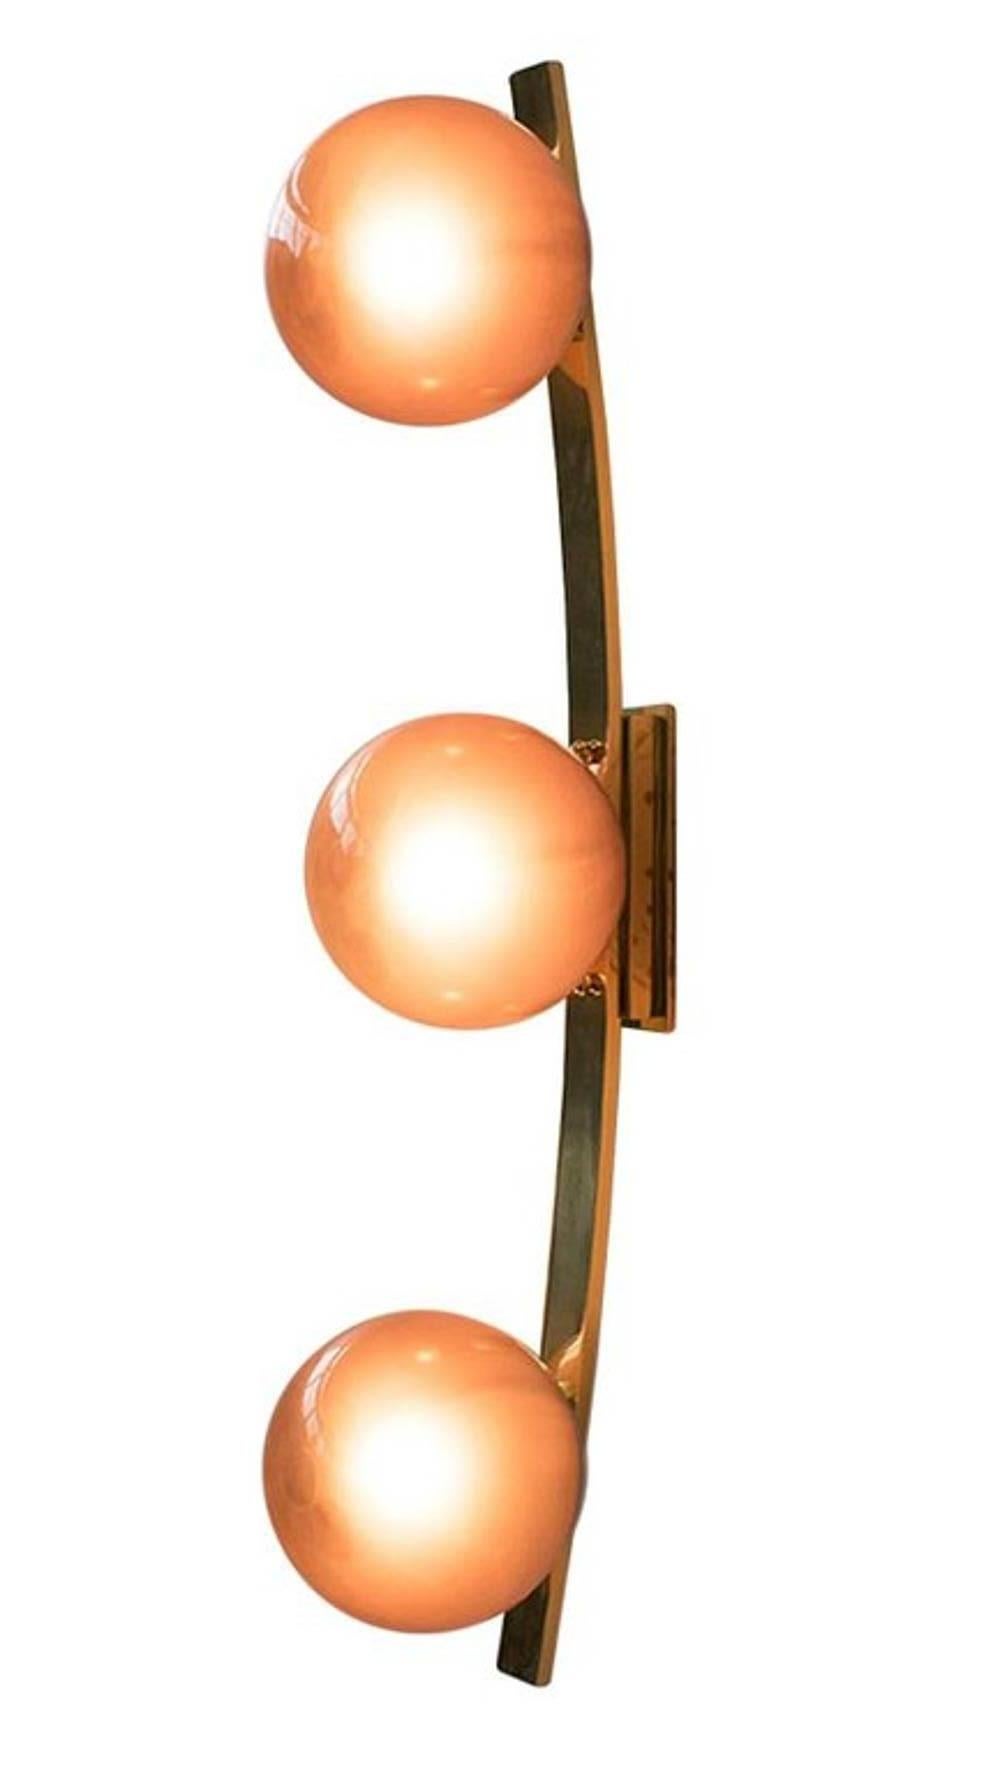 Italian Murano wall light or flush mount with hand blown frosted amethyst Murano glass globes, mounted on curved polished brass finish frame / Designed by Fabio Bergomi / Made in Italy
3 lights / E12 or E14 type / max 40W each
Height: 31.5 inches /